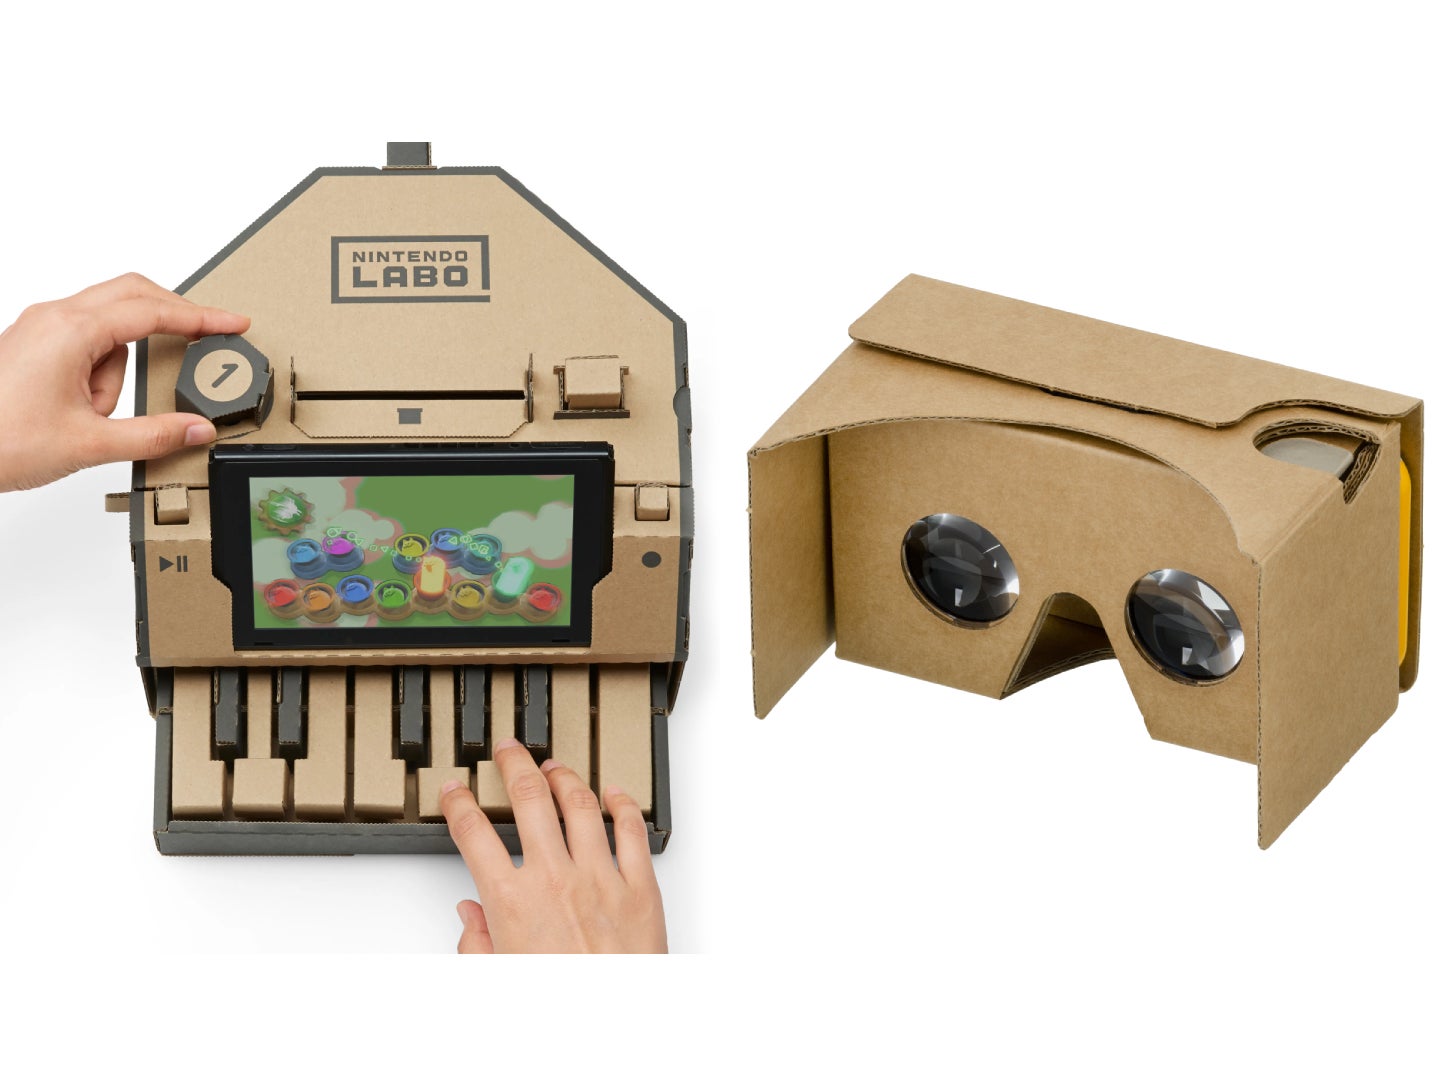 These can basically be said to be from the same product line, right? - Nintendo and Google should absolutely make a VR headset, because that will help the Vision Pro. Hear me out!